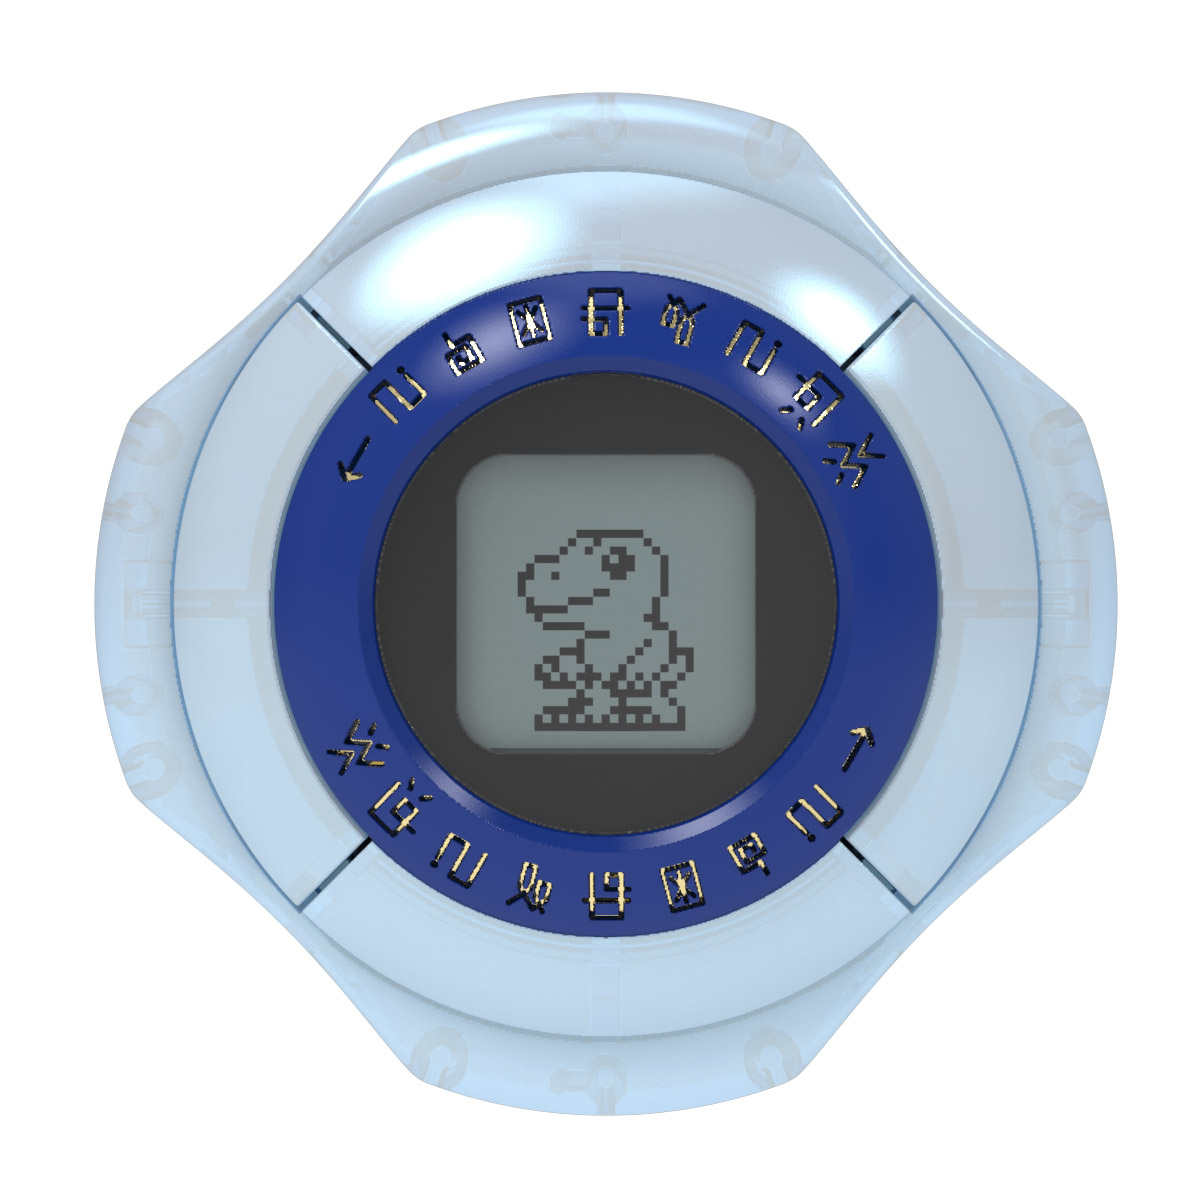 Free shipping from japan F/S Details about   Premium BANDAI DIGIMON ADVENTURE DIGIVICE 2020 Ver 